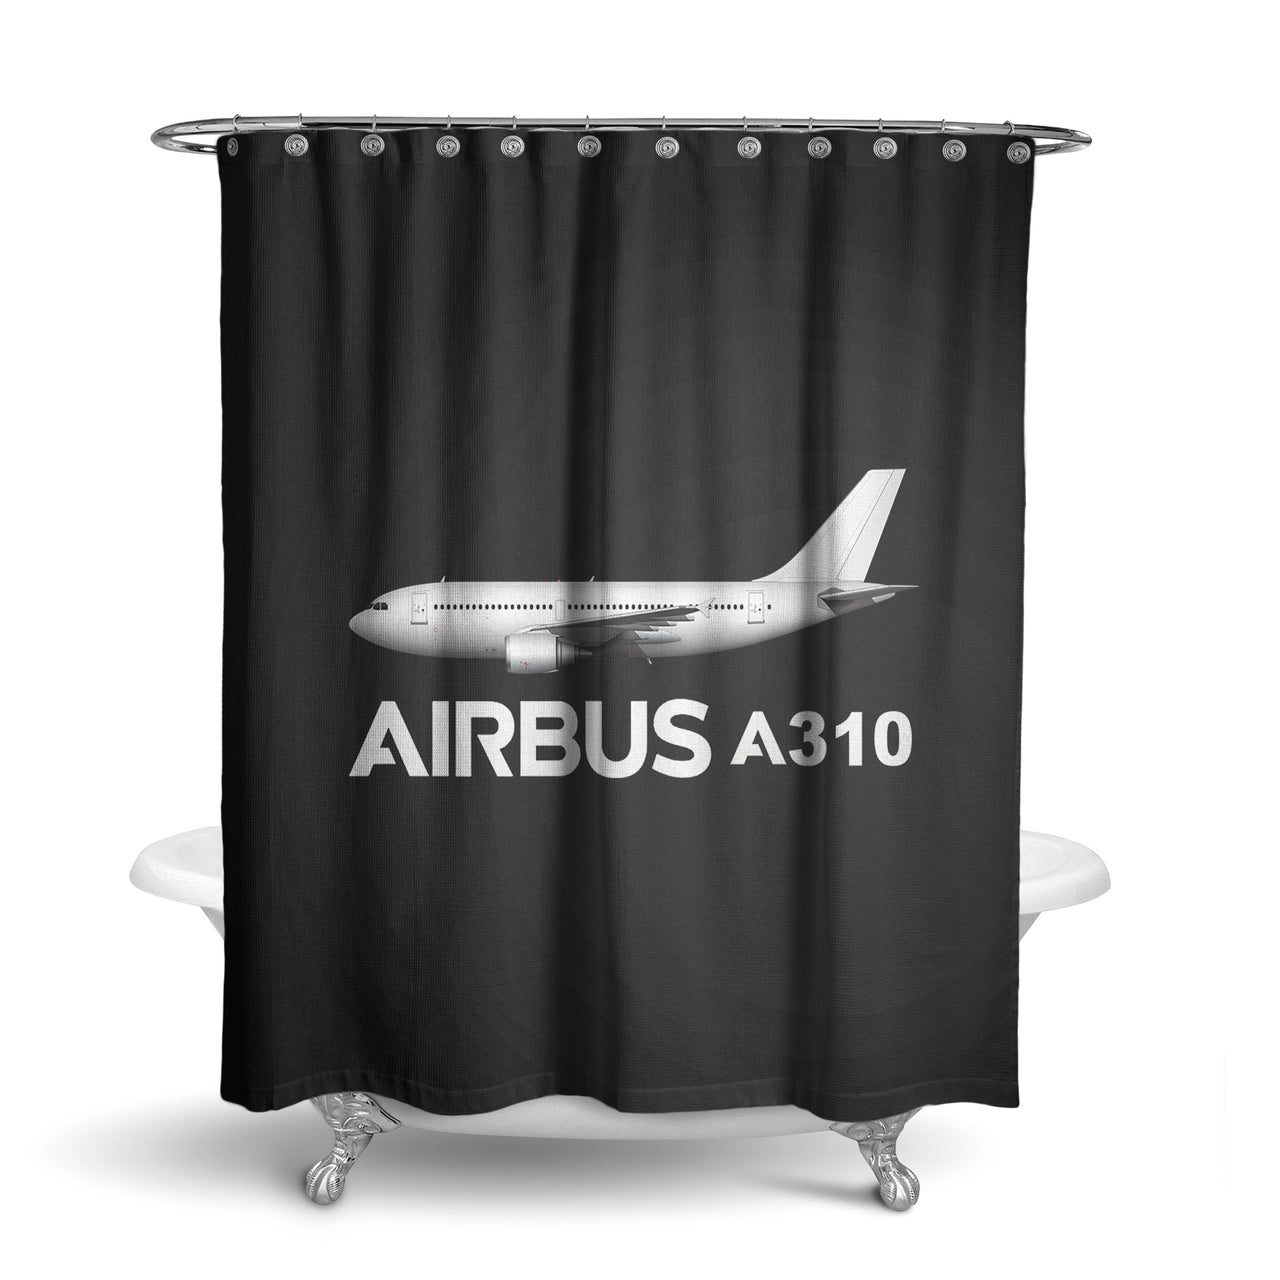 The Airbus A310 Designed Shower Curtains